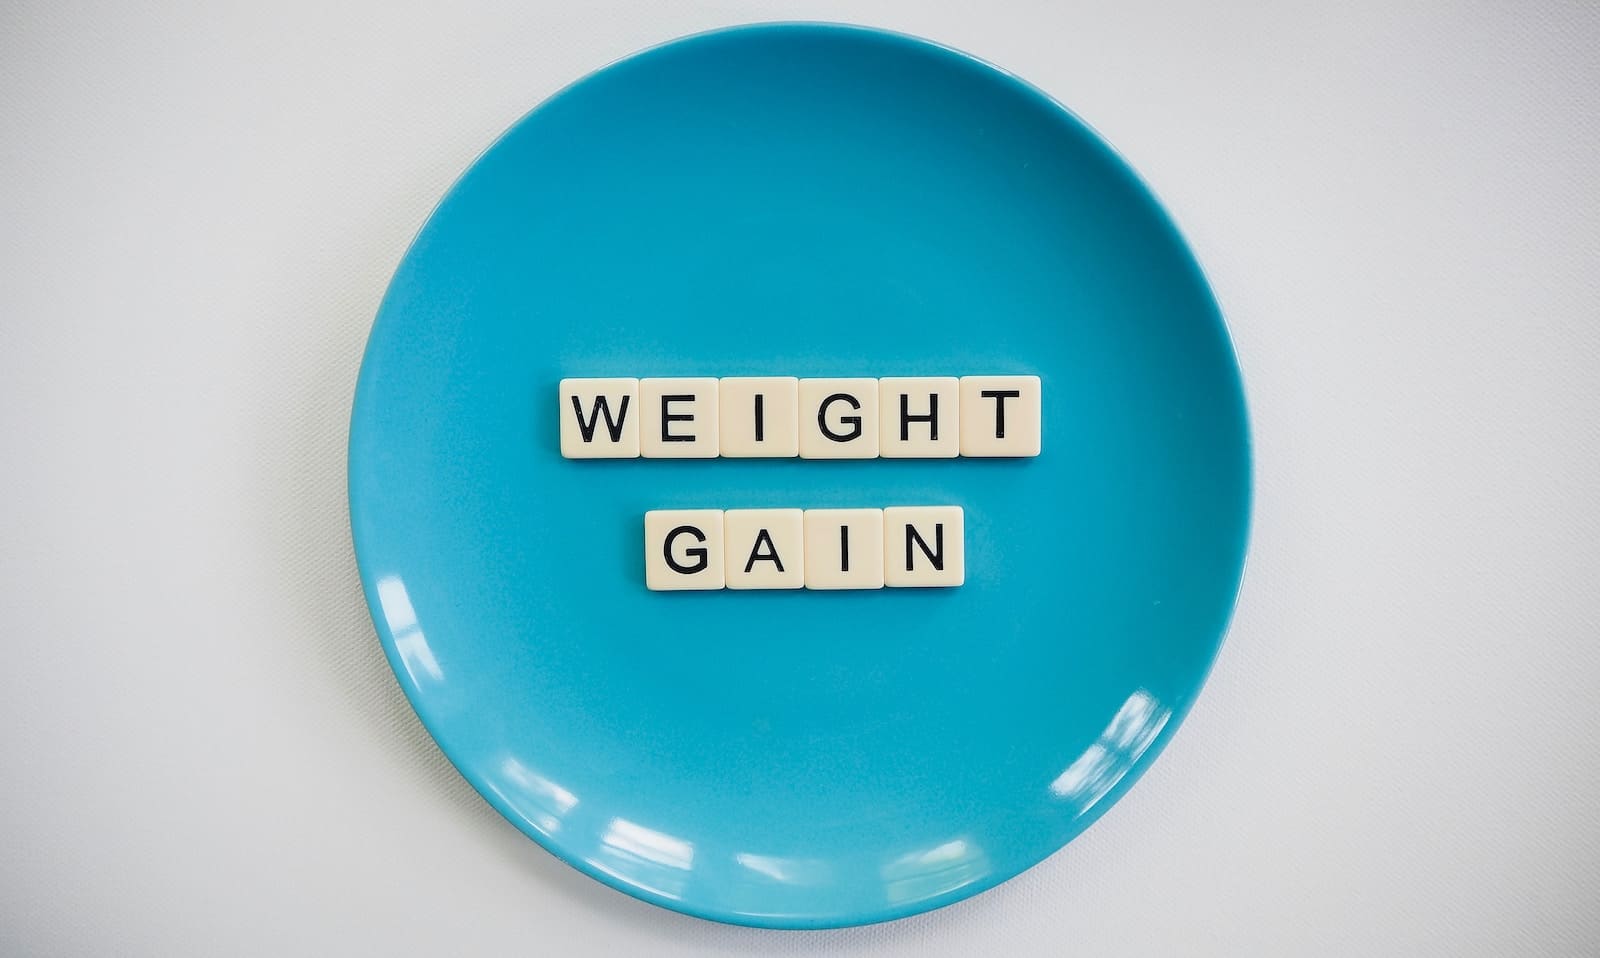 Blue and white round plate with "weight gain" written on it. Digestive Problems - Brisbane Livewell Clinic